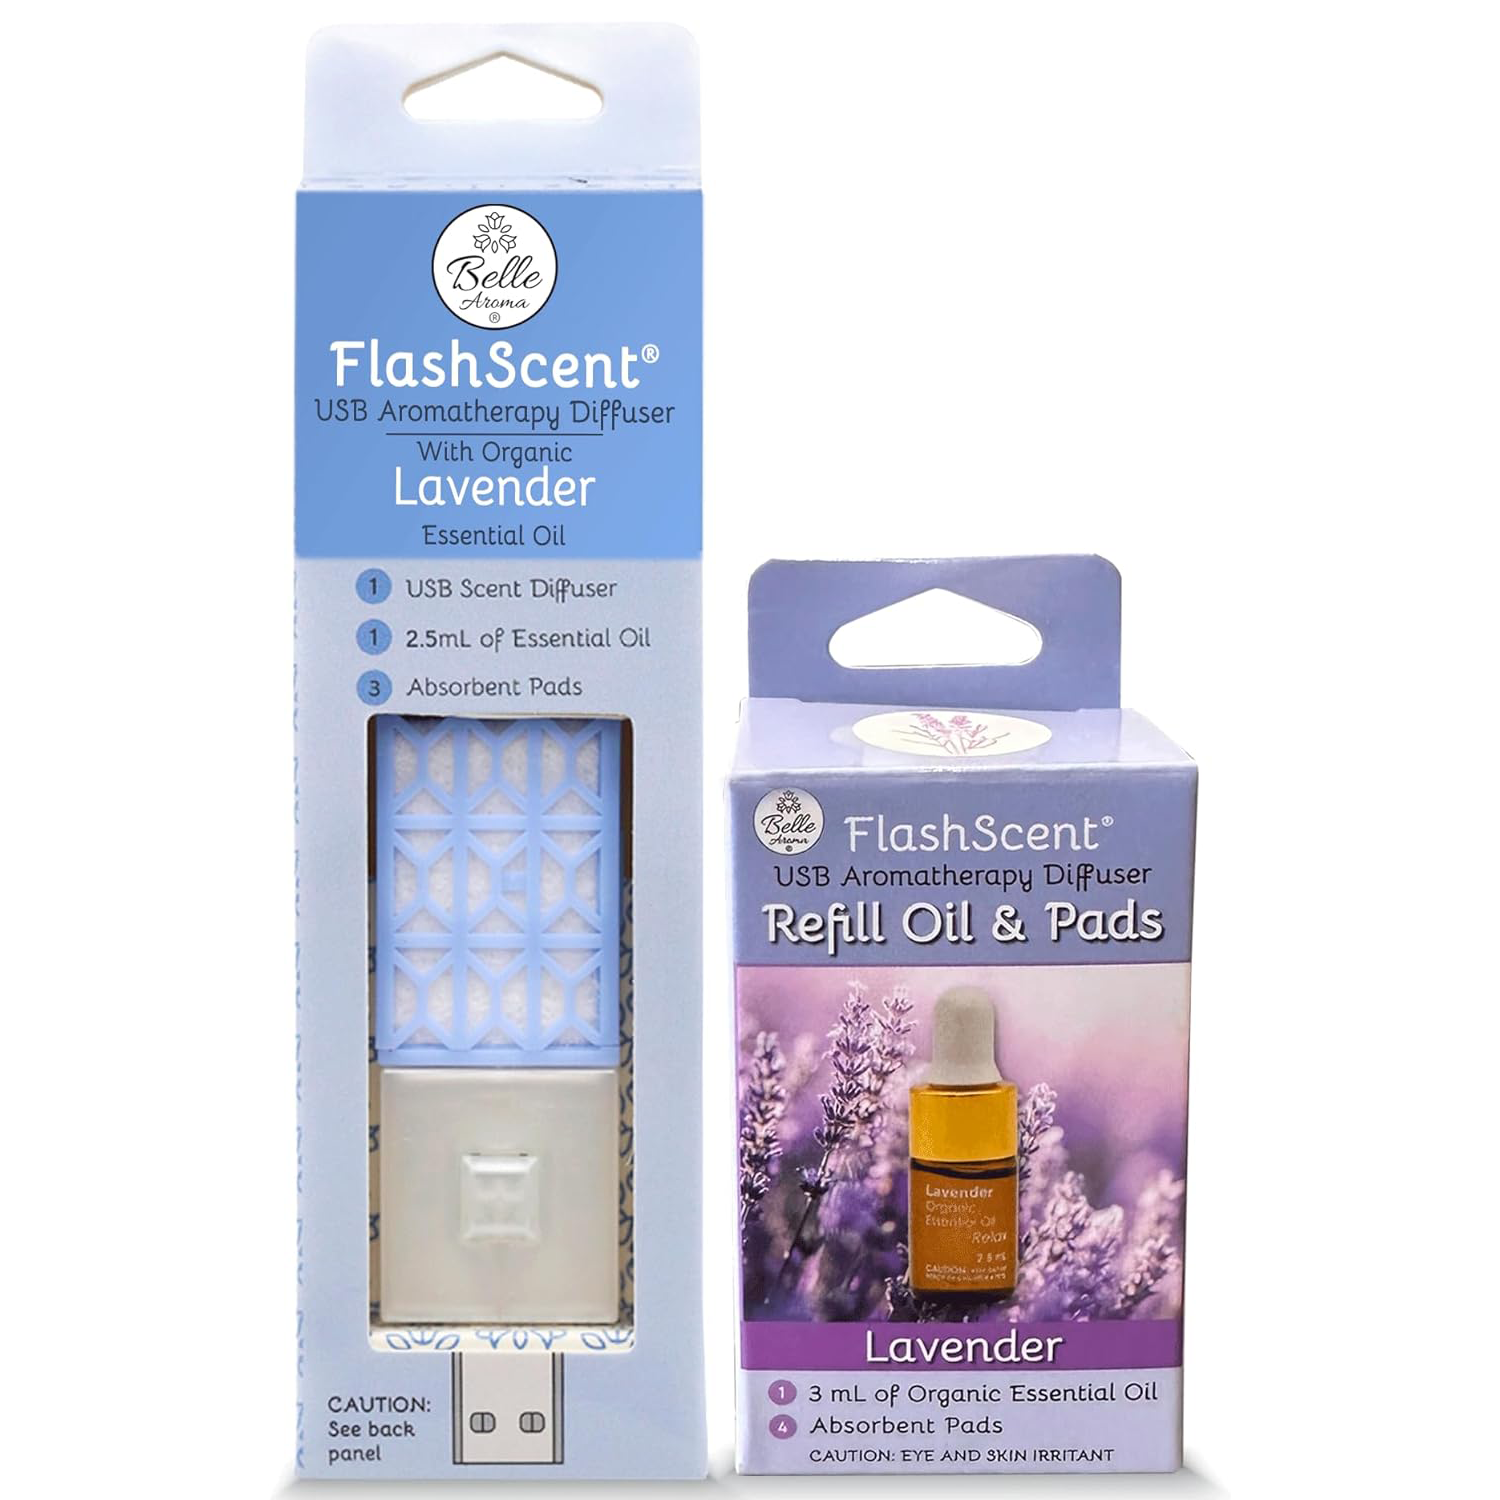 The FlashScent® USB Aromatherapy Essential Oil Diffuser Serenity Blue Diffuser & Lavender + Flashscent Refill Oil 3.5ml and 4 Pads aromatherapy